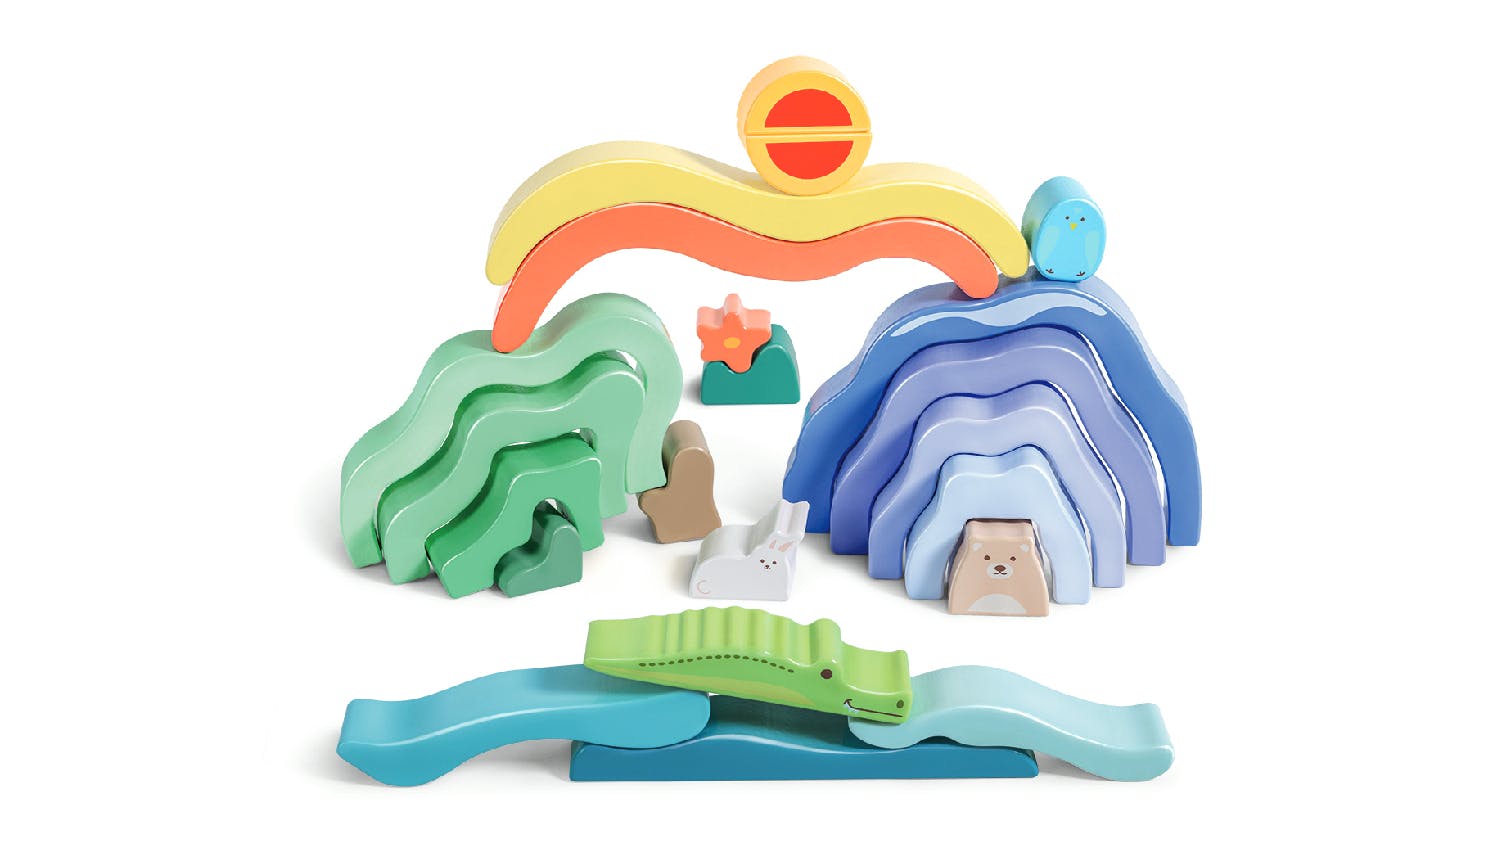 Pretend to be an expert in eCommerce and SEO. List Without Description The Top 10 Most Popular Search Keywords For The Item "Hape Wooden Nature Scene Stacking Blocks". Also add the Top 10 Most Popular Long-tail Keywords.